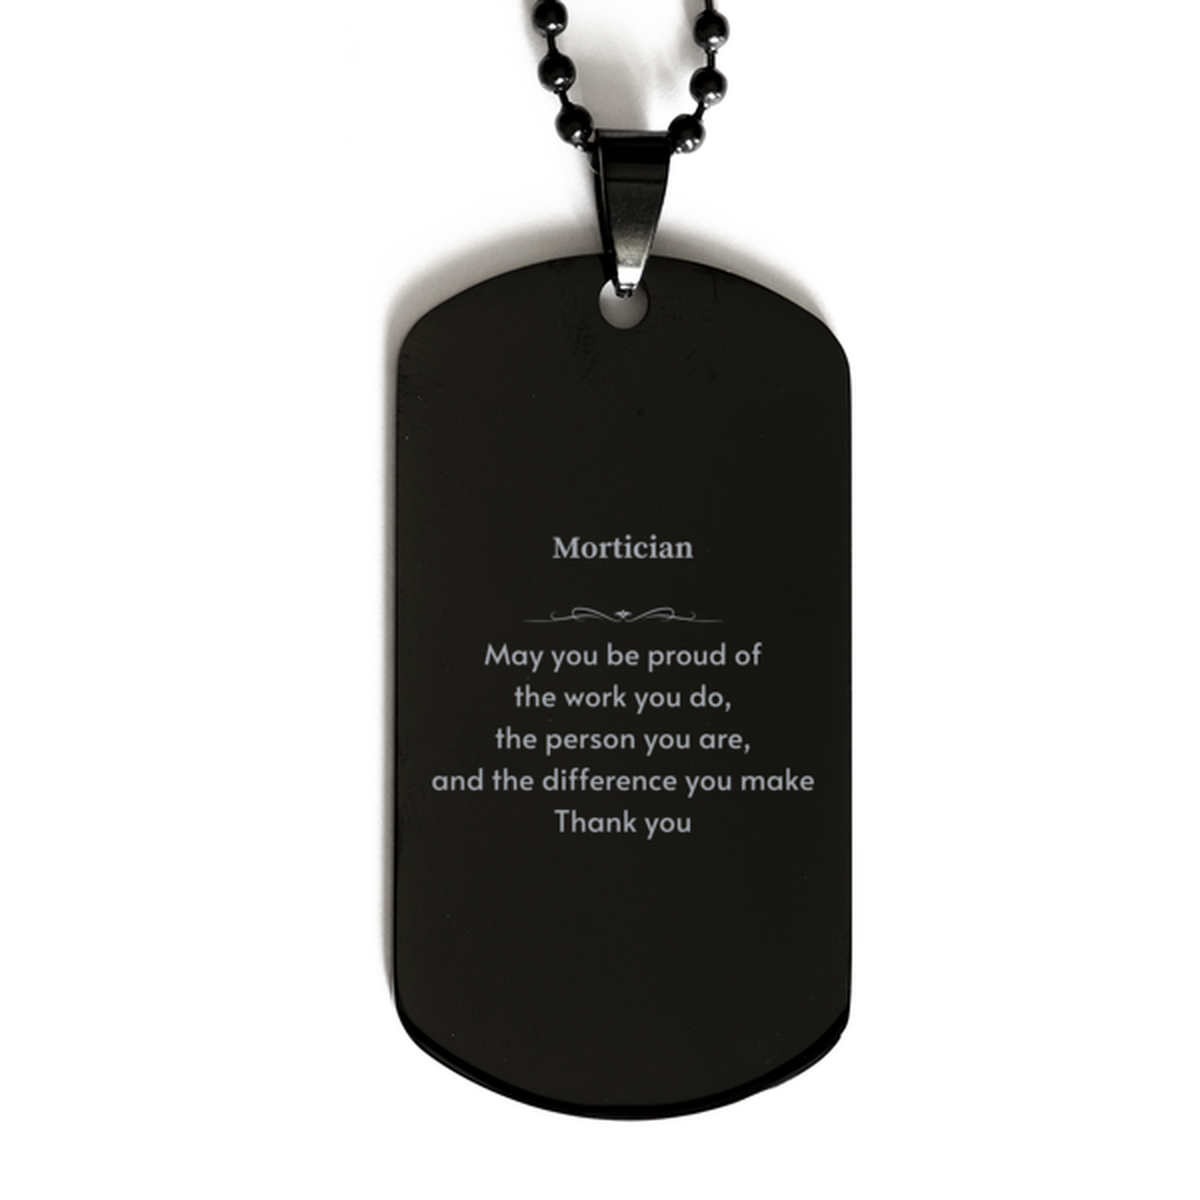 Heartwarming Black Dog Tag Retirement Coworkers Gifts for Mortician, Mortician May You be proud of the work you do, the person you are Gifts for Boss Men Women Friends